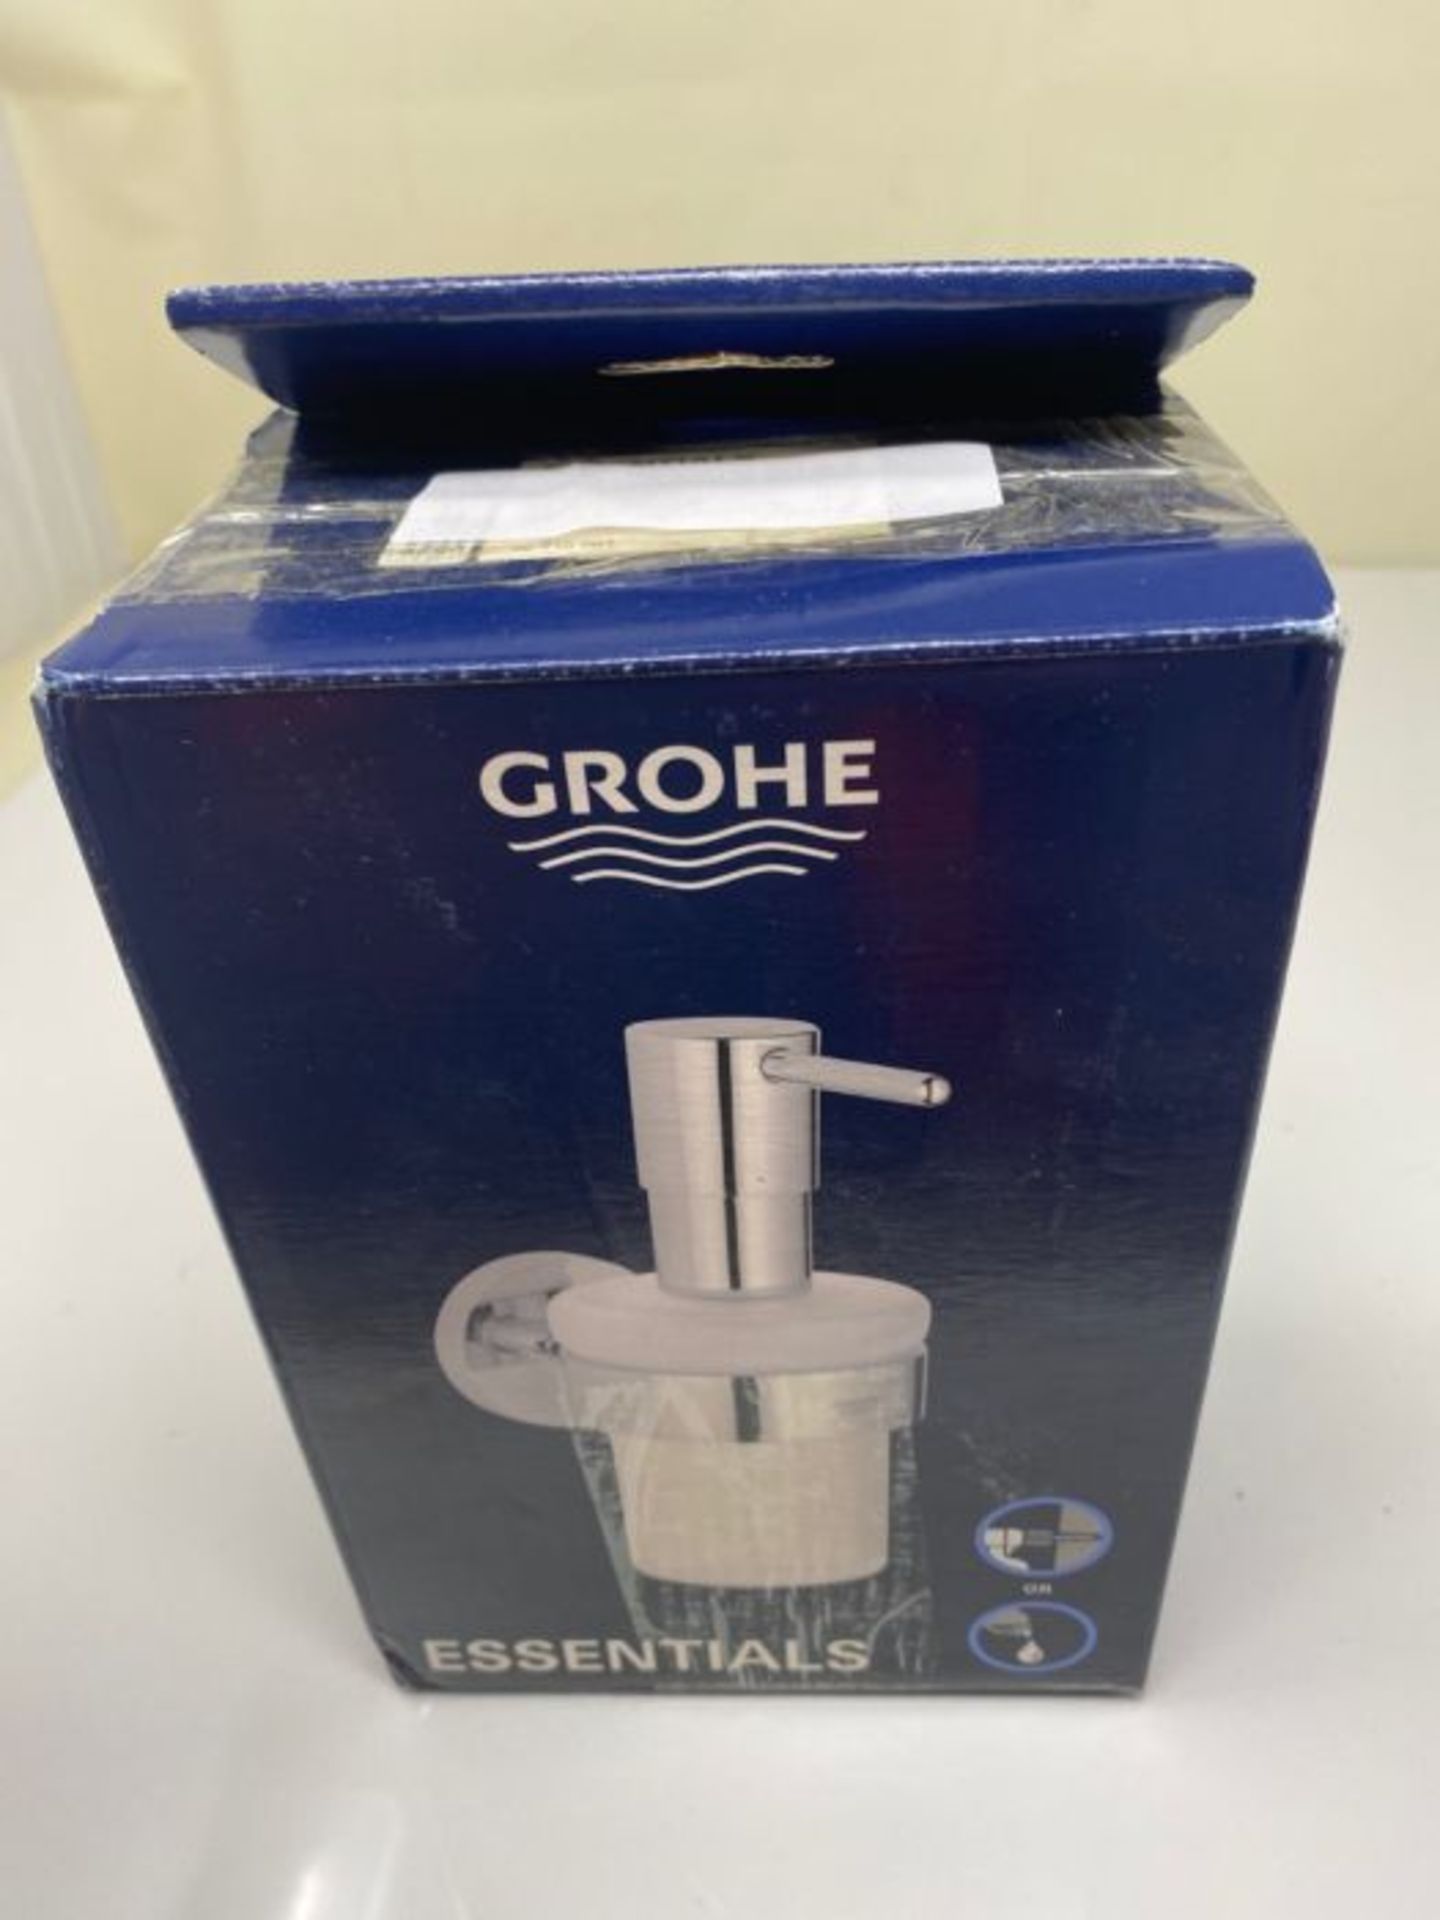 GROHE 40756001 Essentials Cube Soap Dispenser Silver - Image 2 of 3